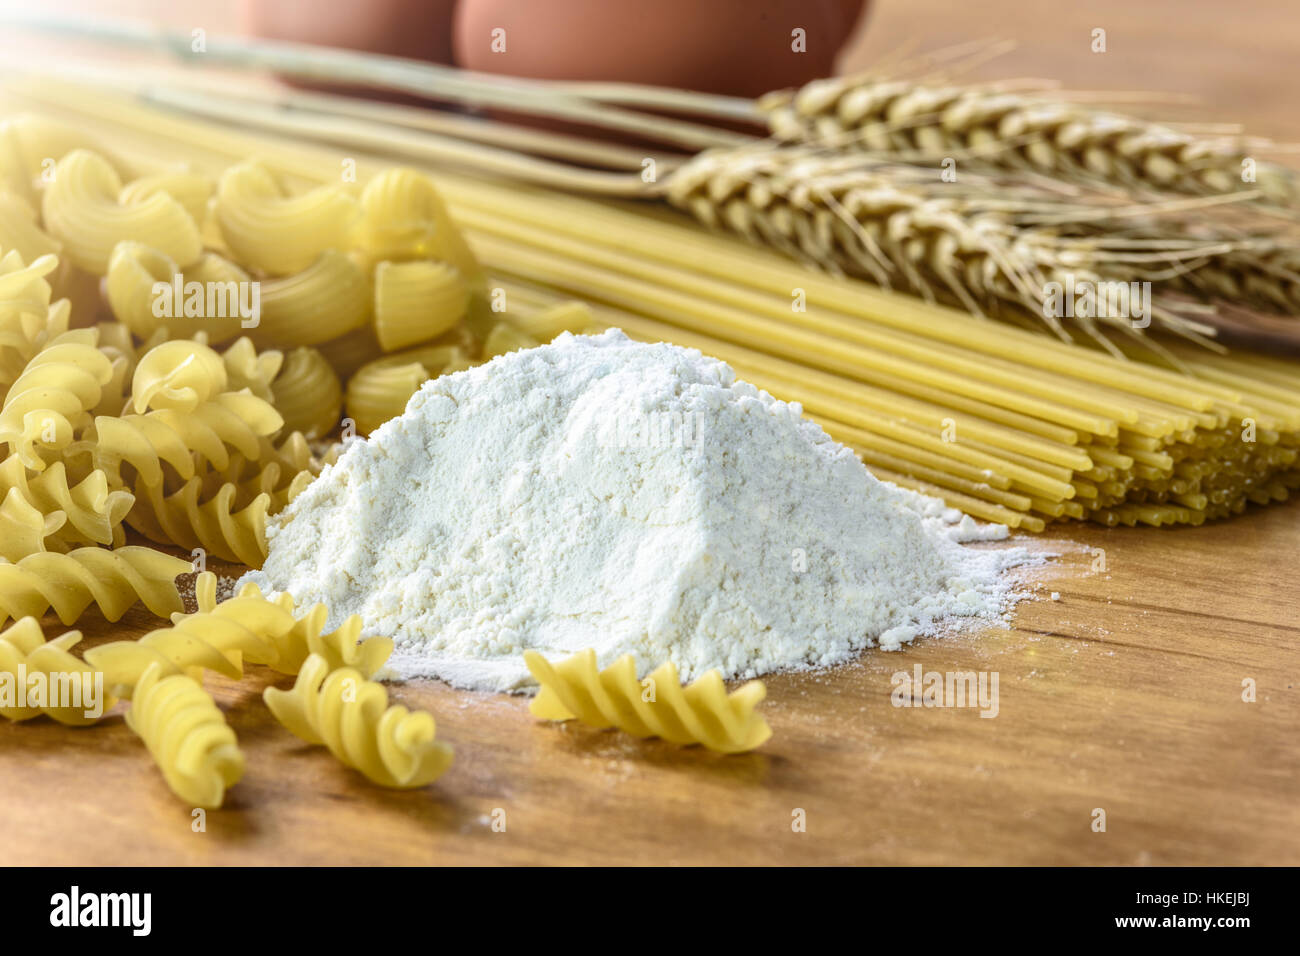 The Concept Of Producing Different Types Of Pasta Made From Flour And Eggs Stock Photo Alamy